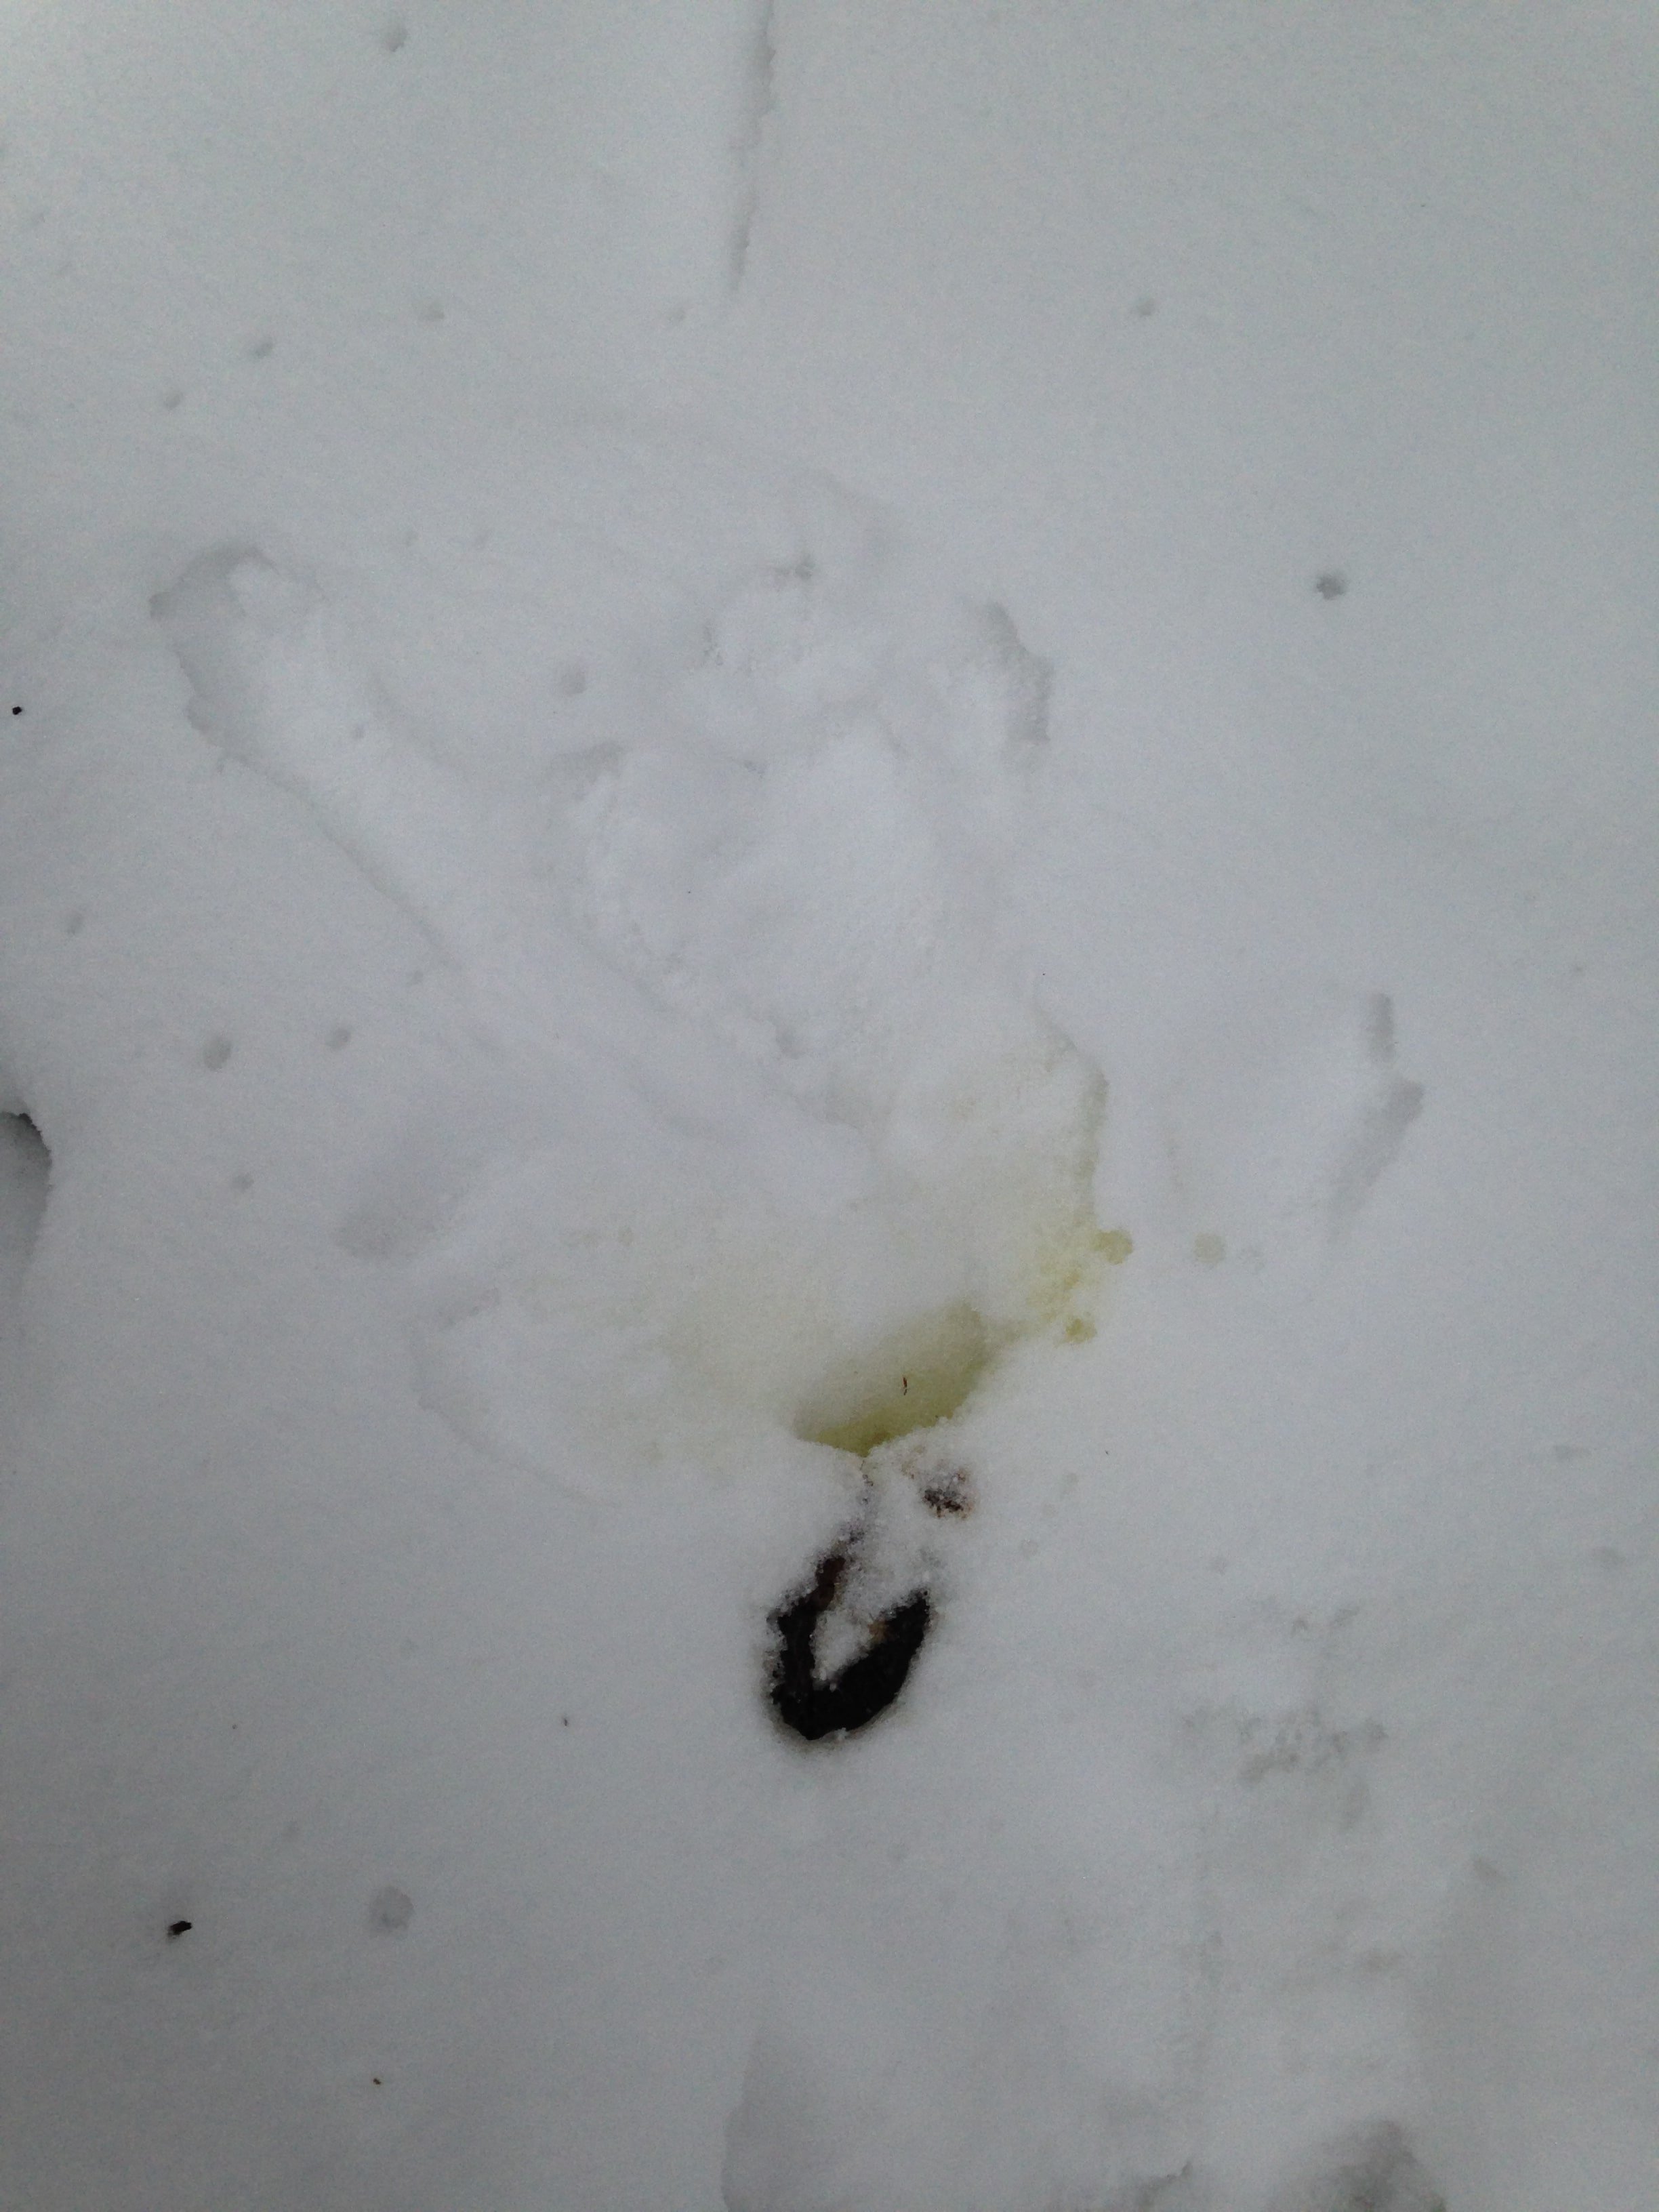 Scat, urine and impression on the snow